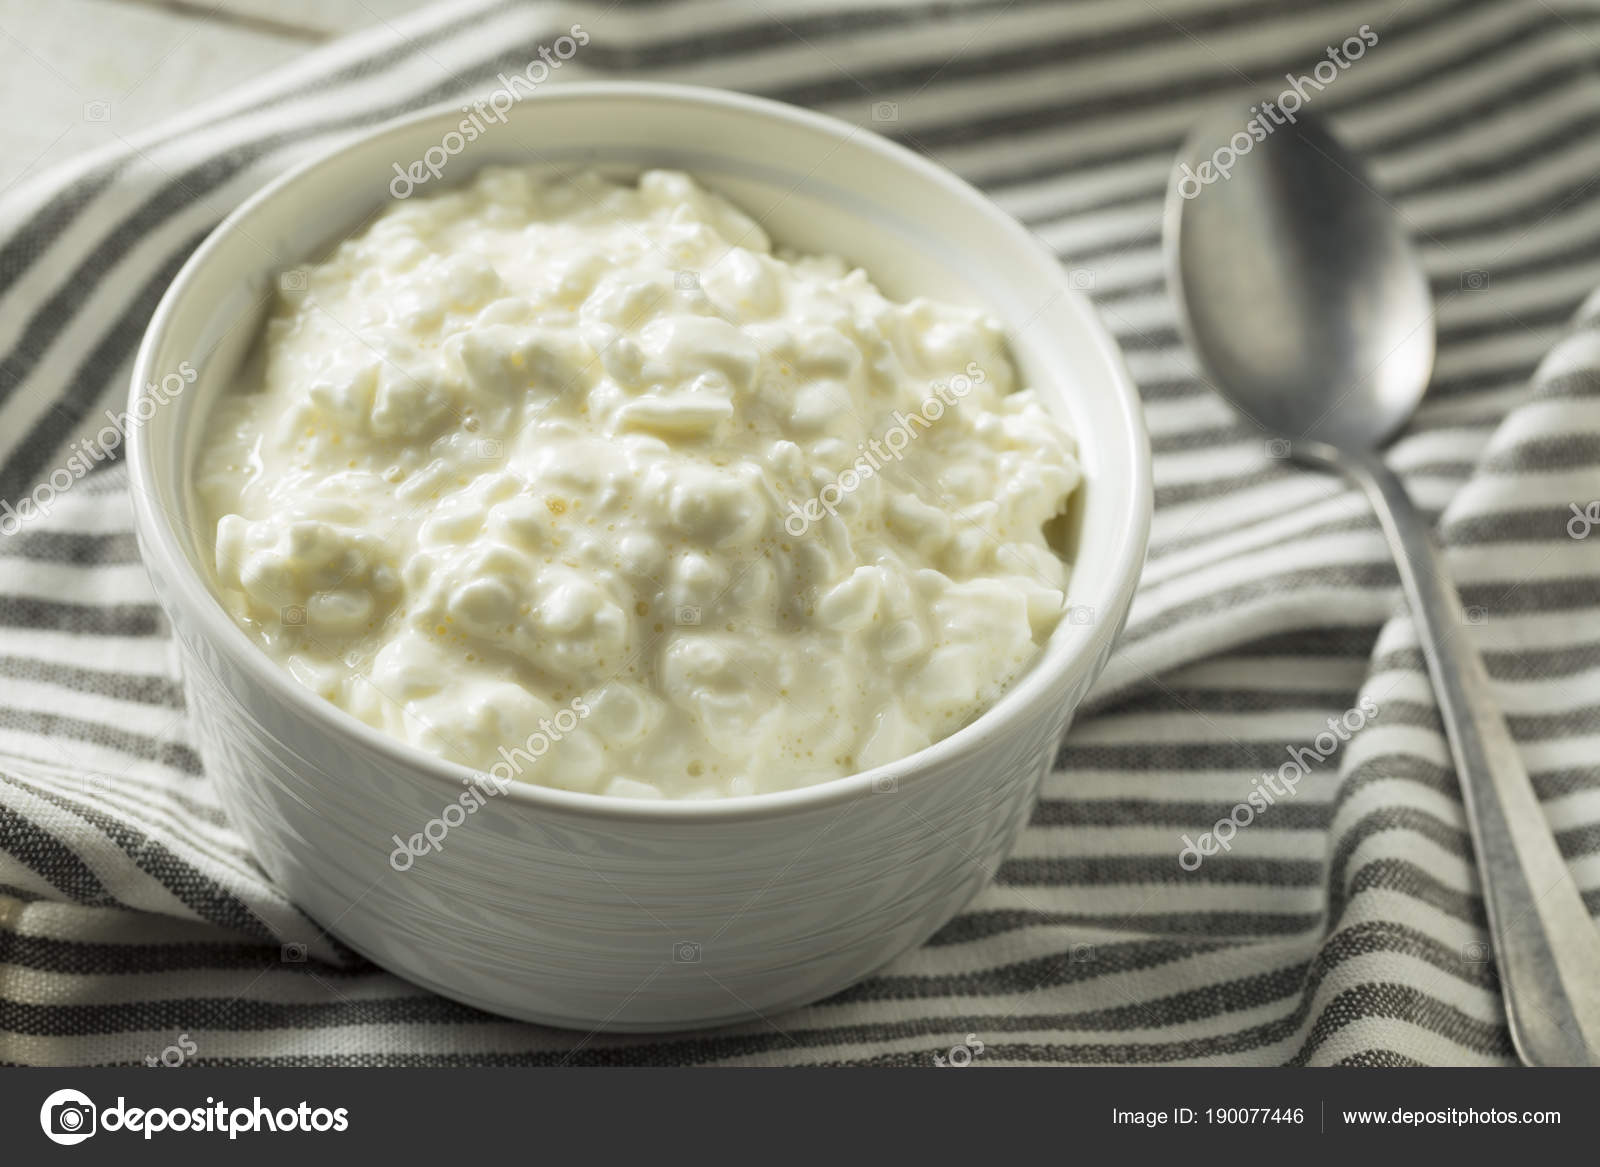 Homemade Low Fat Cottage Cheese Stock Photo C Bhofack2 190077446